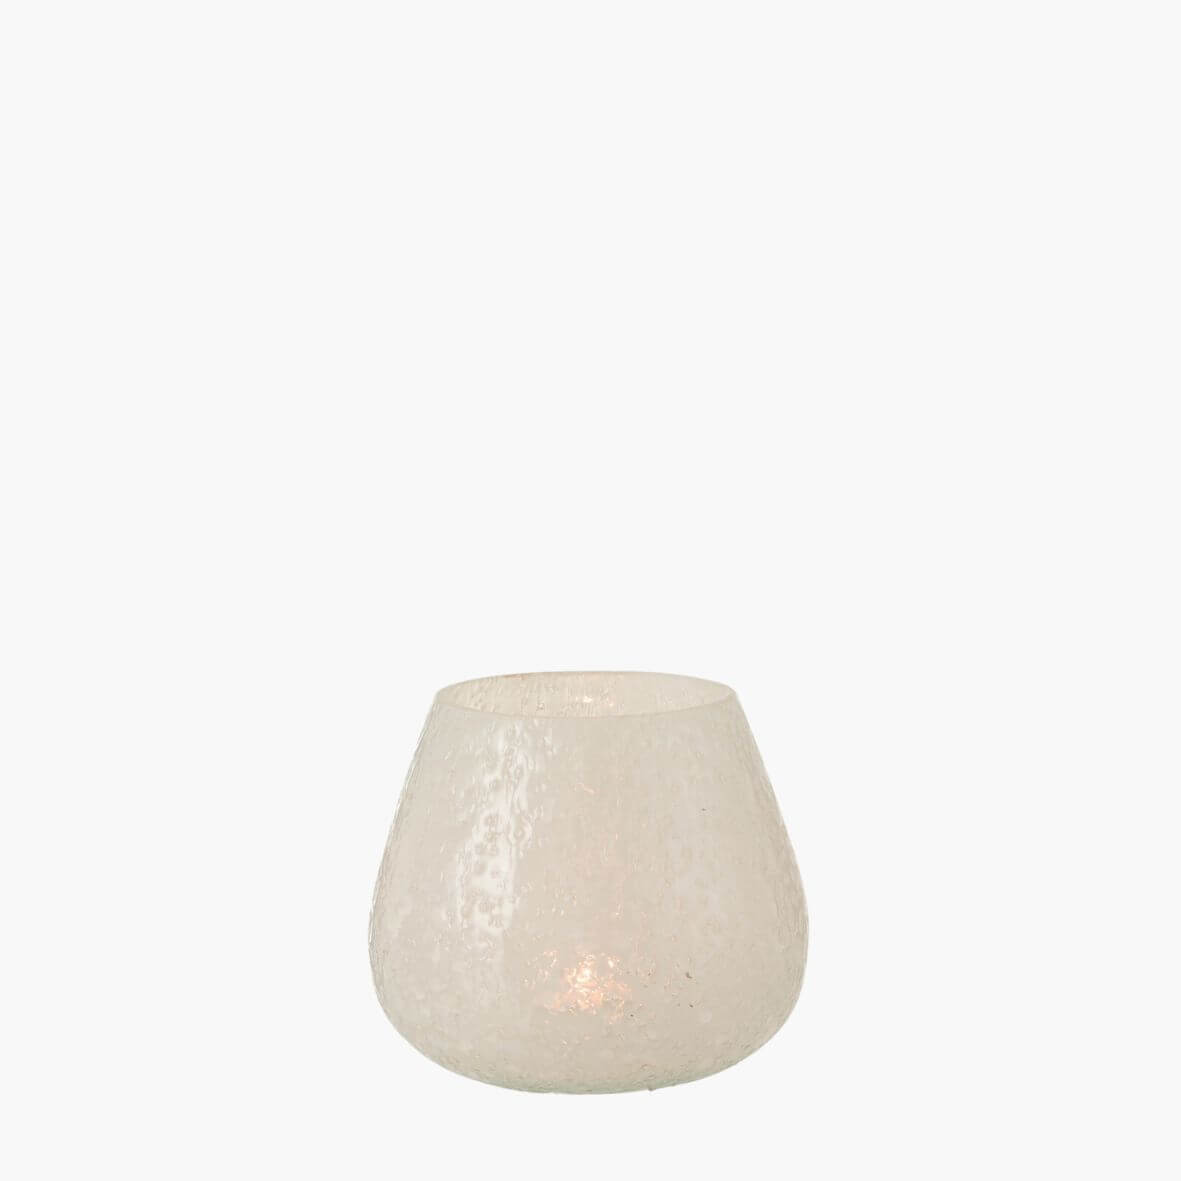 White glass etched hurricane for candle on white background